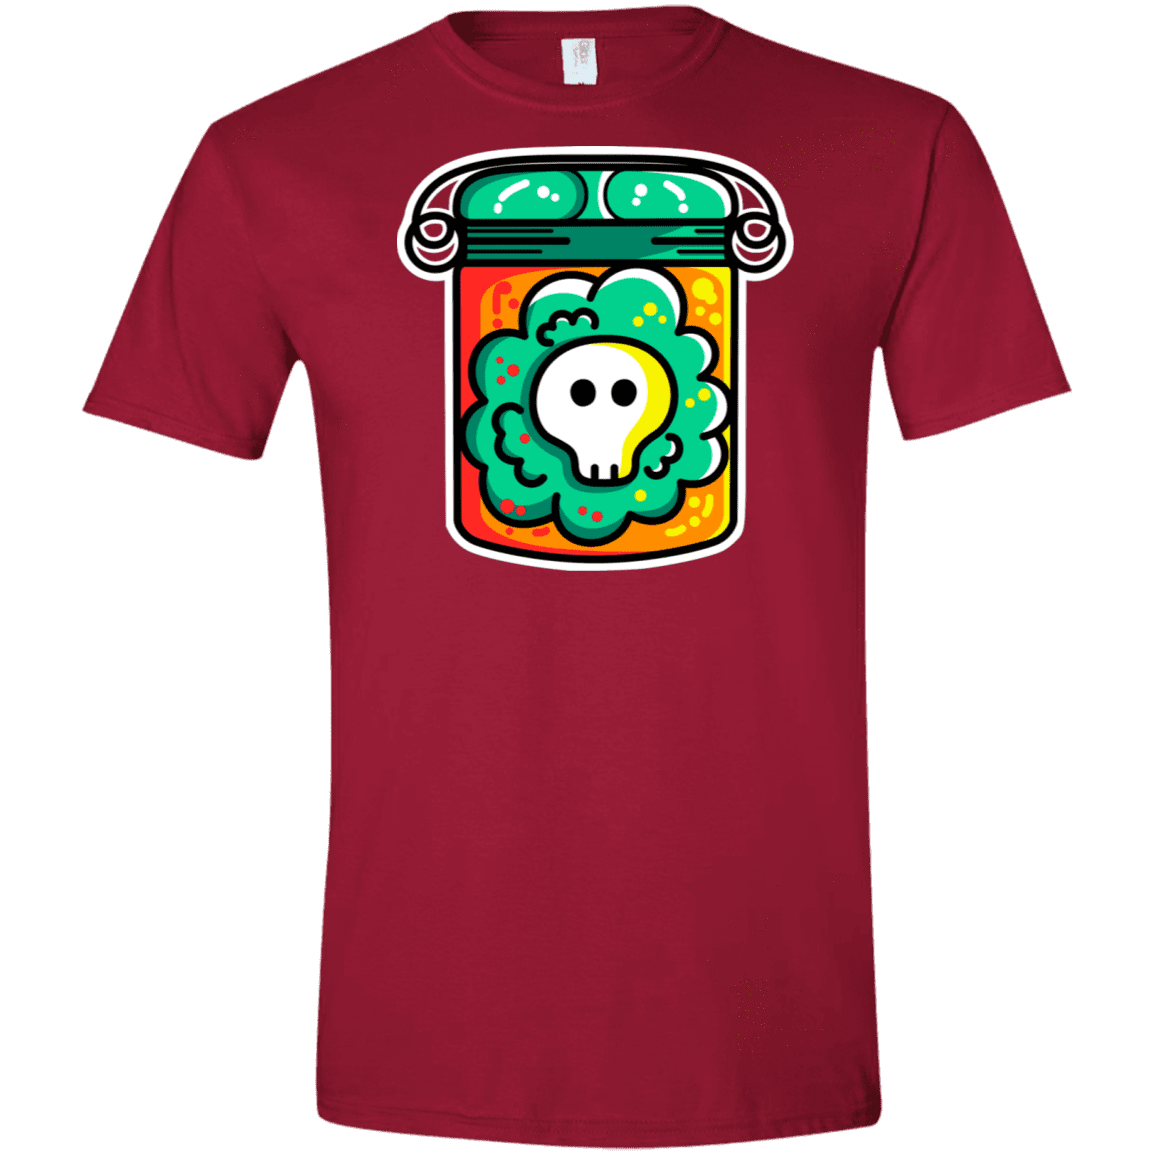 T-Shirts Cardinal Red / S Cute Skull In A Jar Men's Semi-Fitted Softstyle